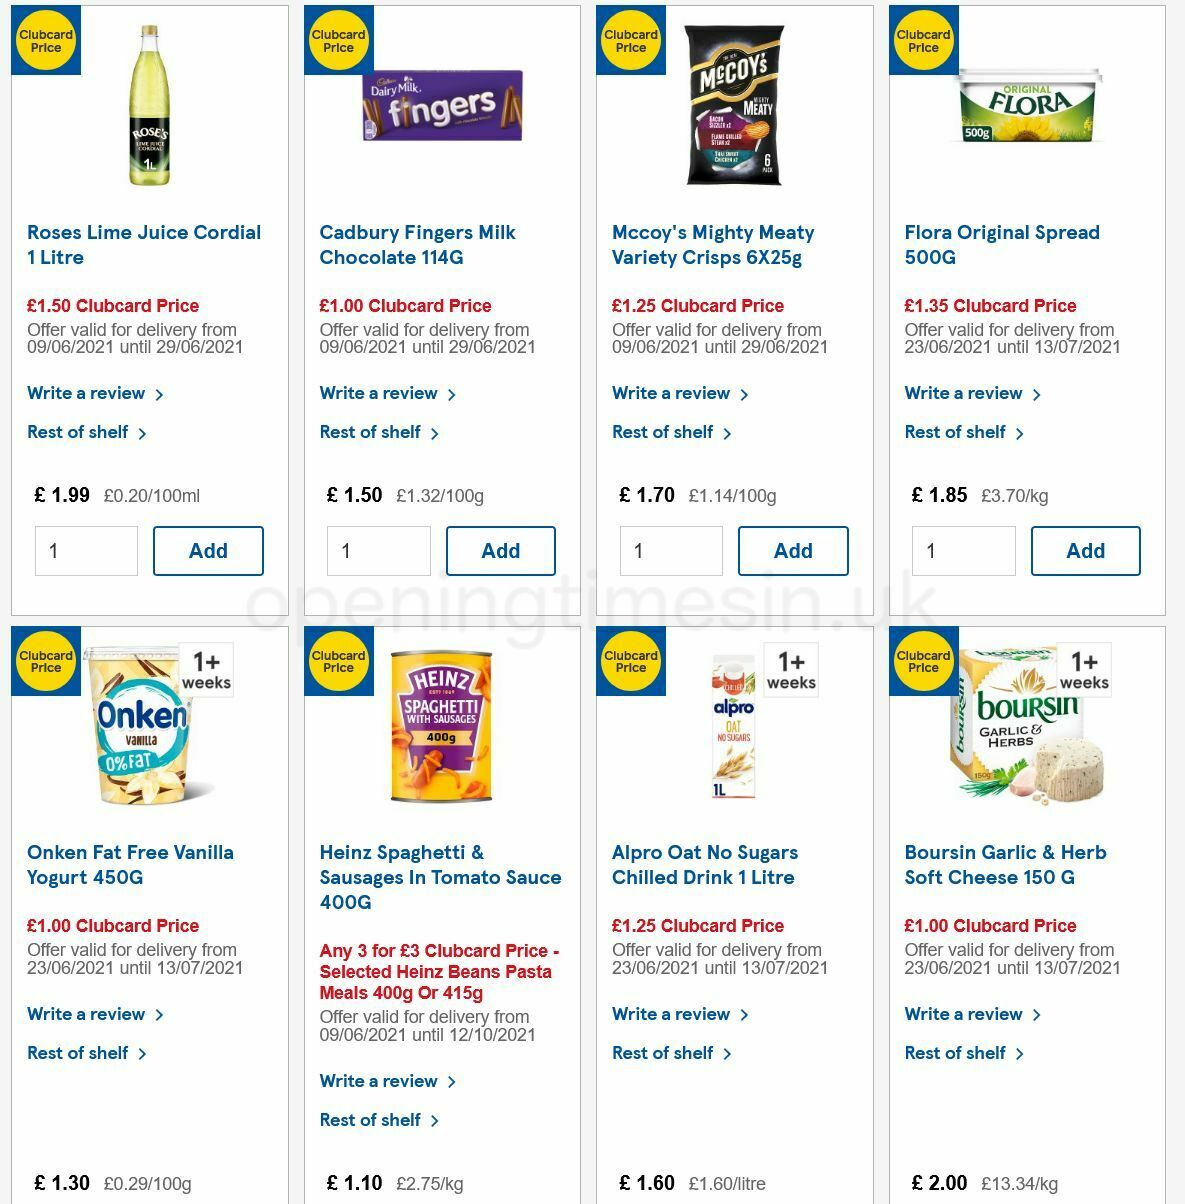 TESCO Offers from 23 June